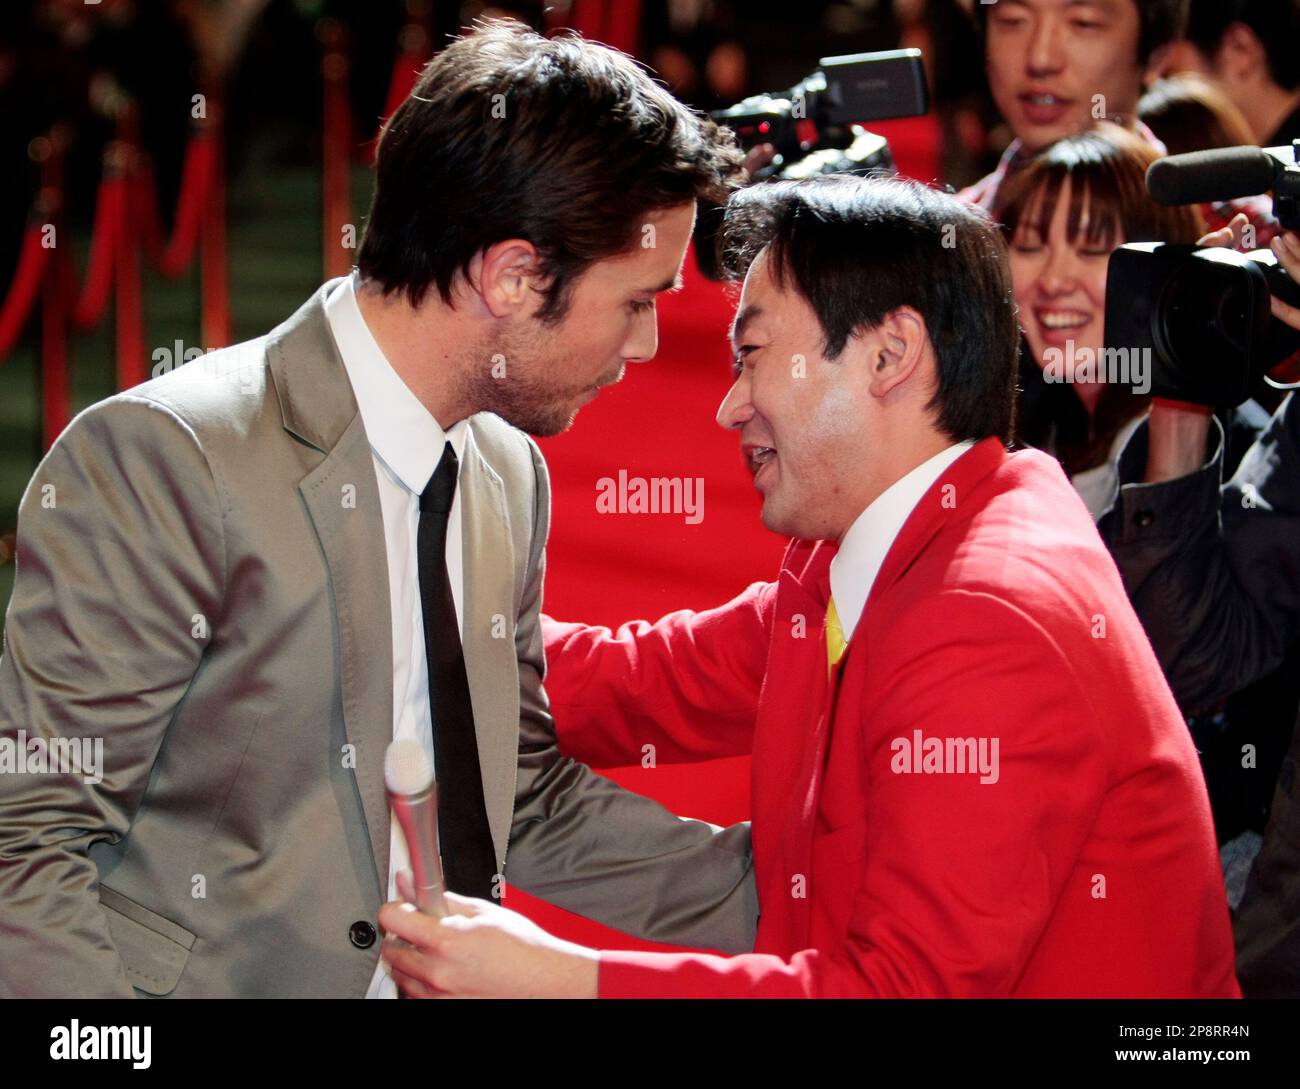 Canadian actor Justin Chatwin, left, reacts as he is hugged by a Japanaese TV interviewer upon arriving at the world premiere of Dragonball Evolution, the Hollywood adaptation of the famed Japanese cartoon series, in Tokyo, Japan, Tuesday, March 10, 2009. (AP Photo/Itsuo Inouye) Stock Photo